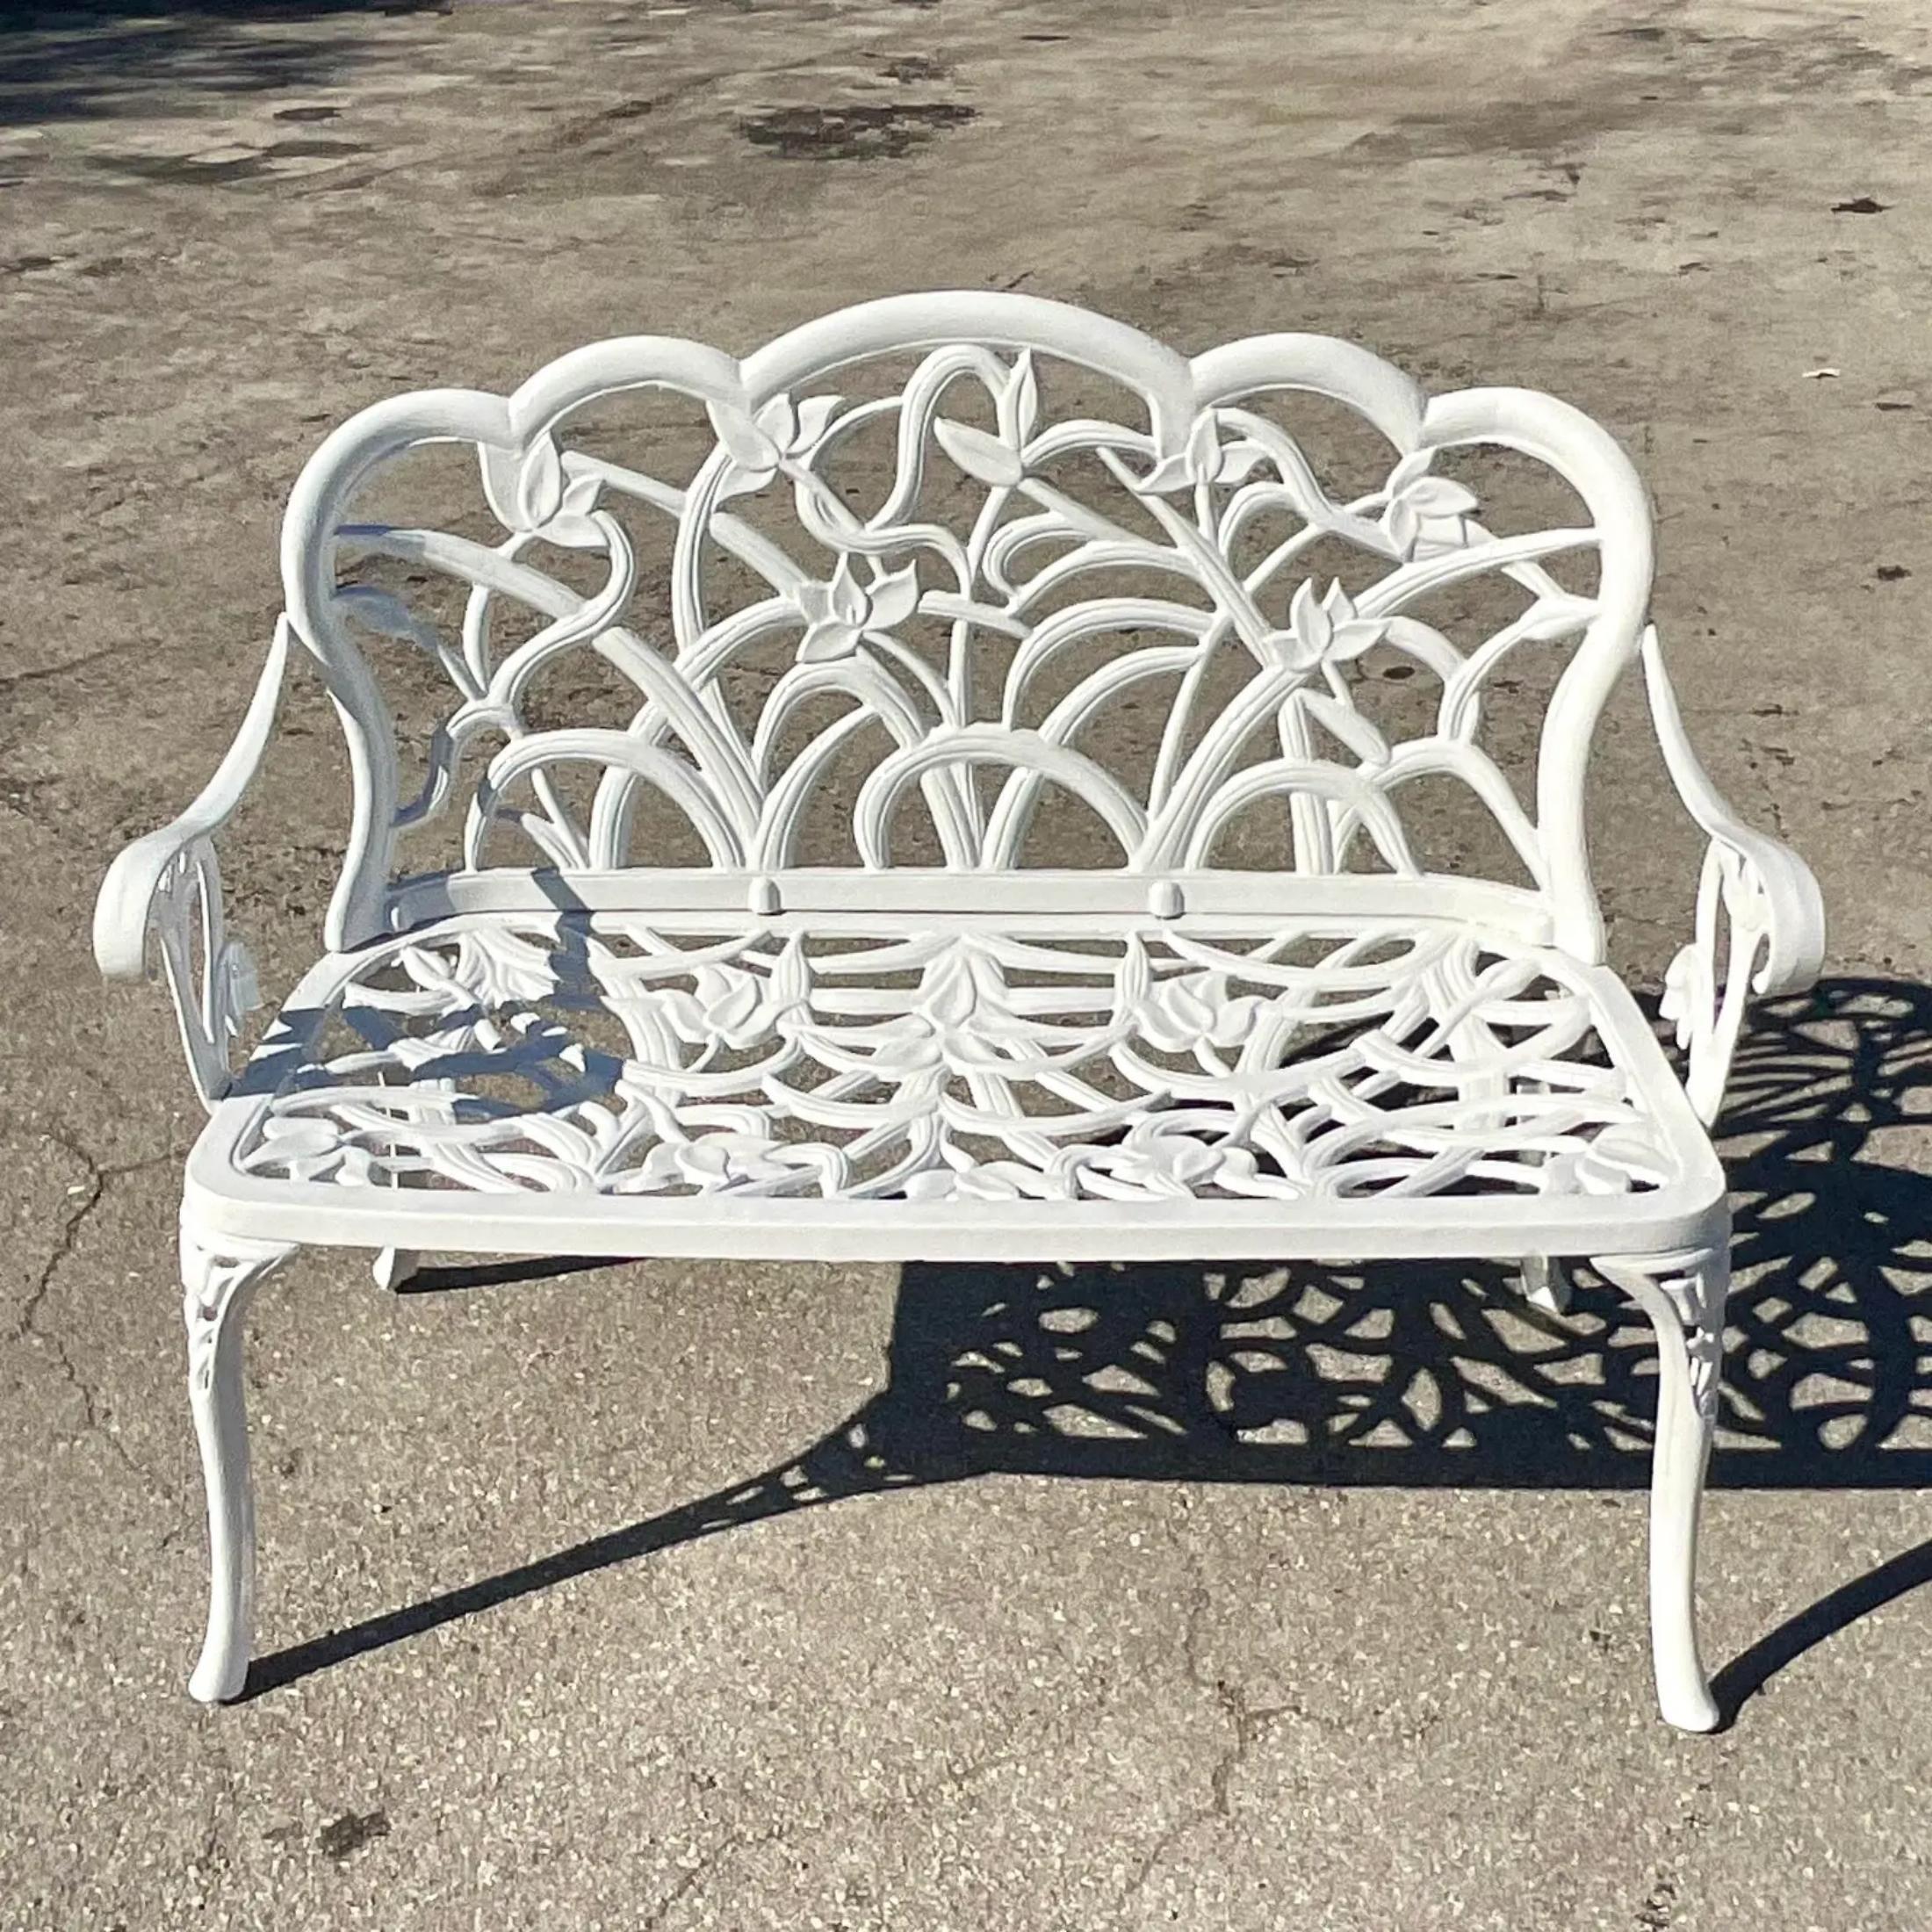 A fantastic vintage Coastal settee. A beautiful cast aluminum frame in a chic floral design. Fully restored with all new powder coating. Acquired from a Palm Beach estate